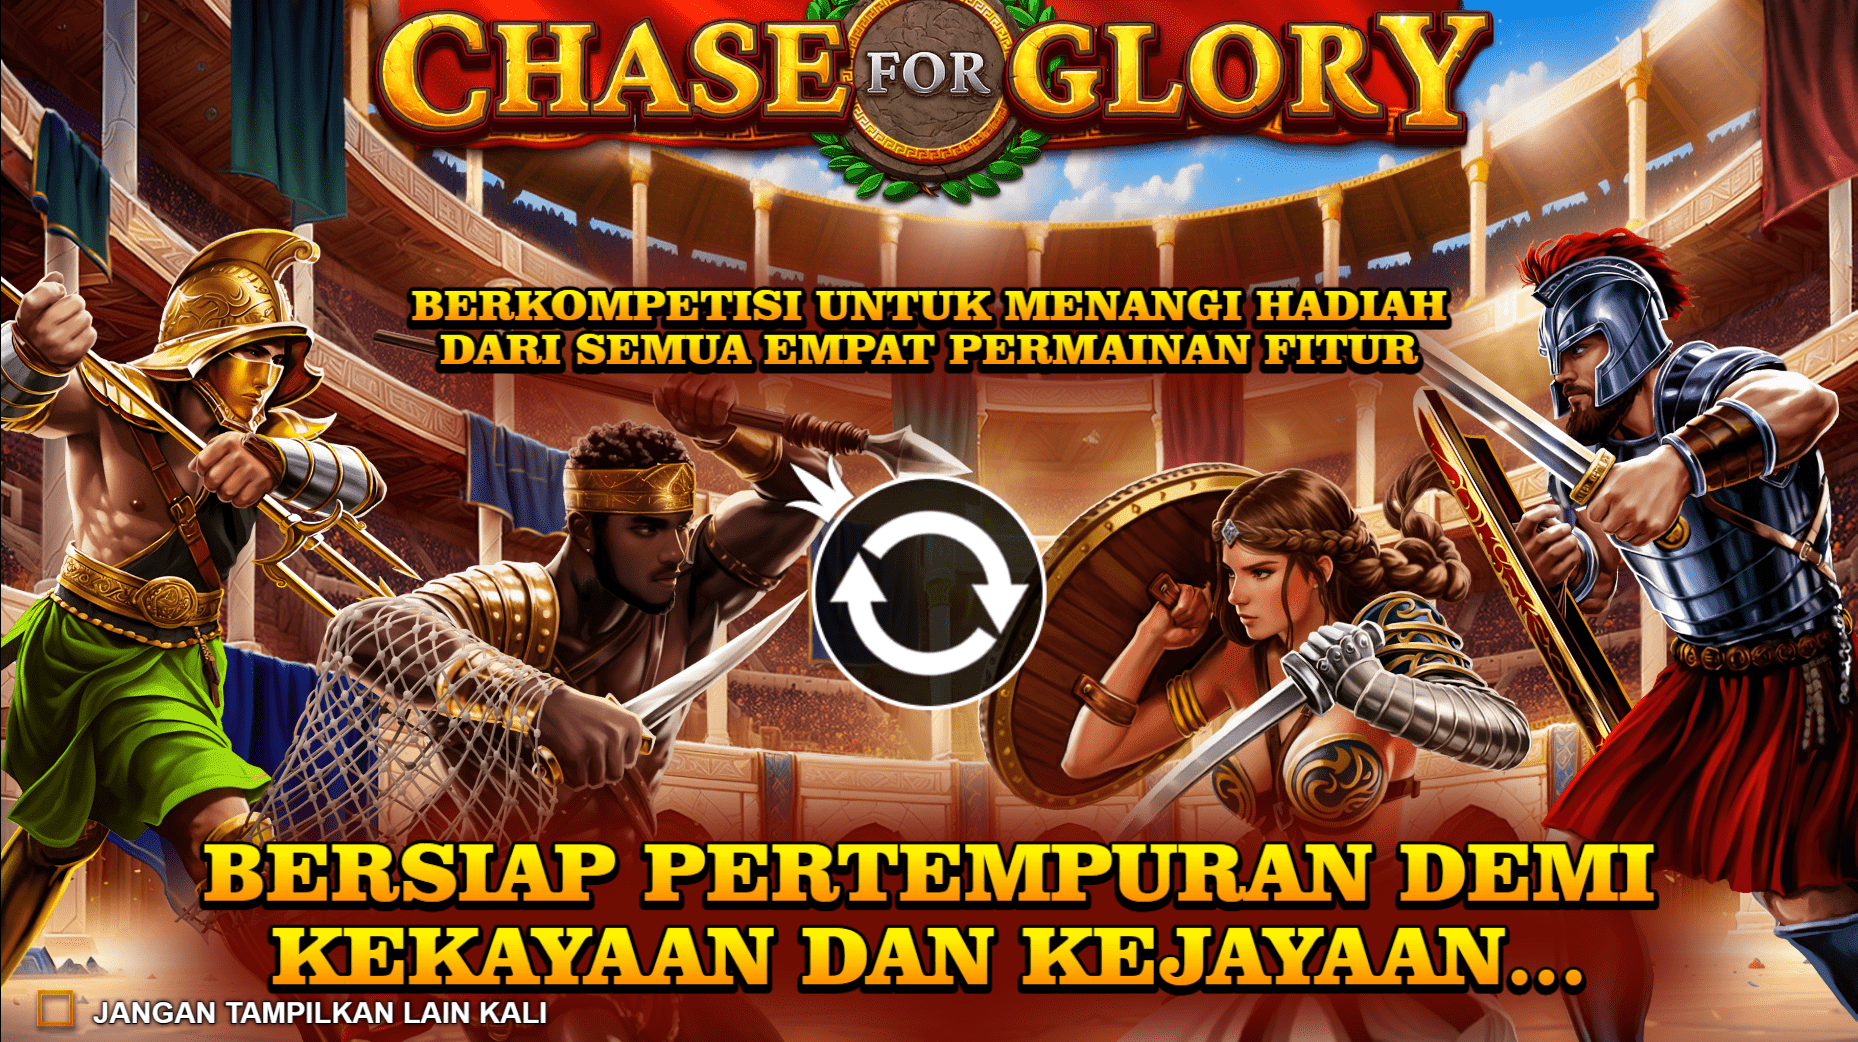 Demo Slot Chase For Glory